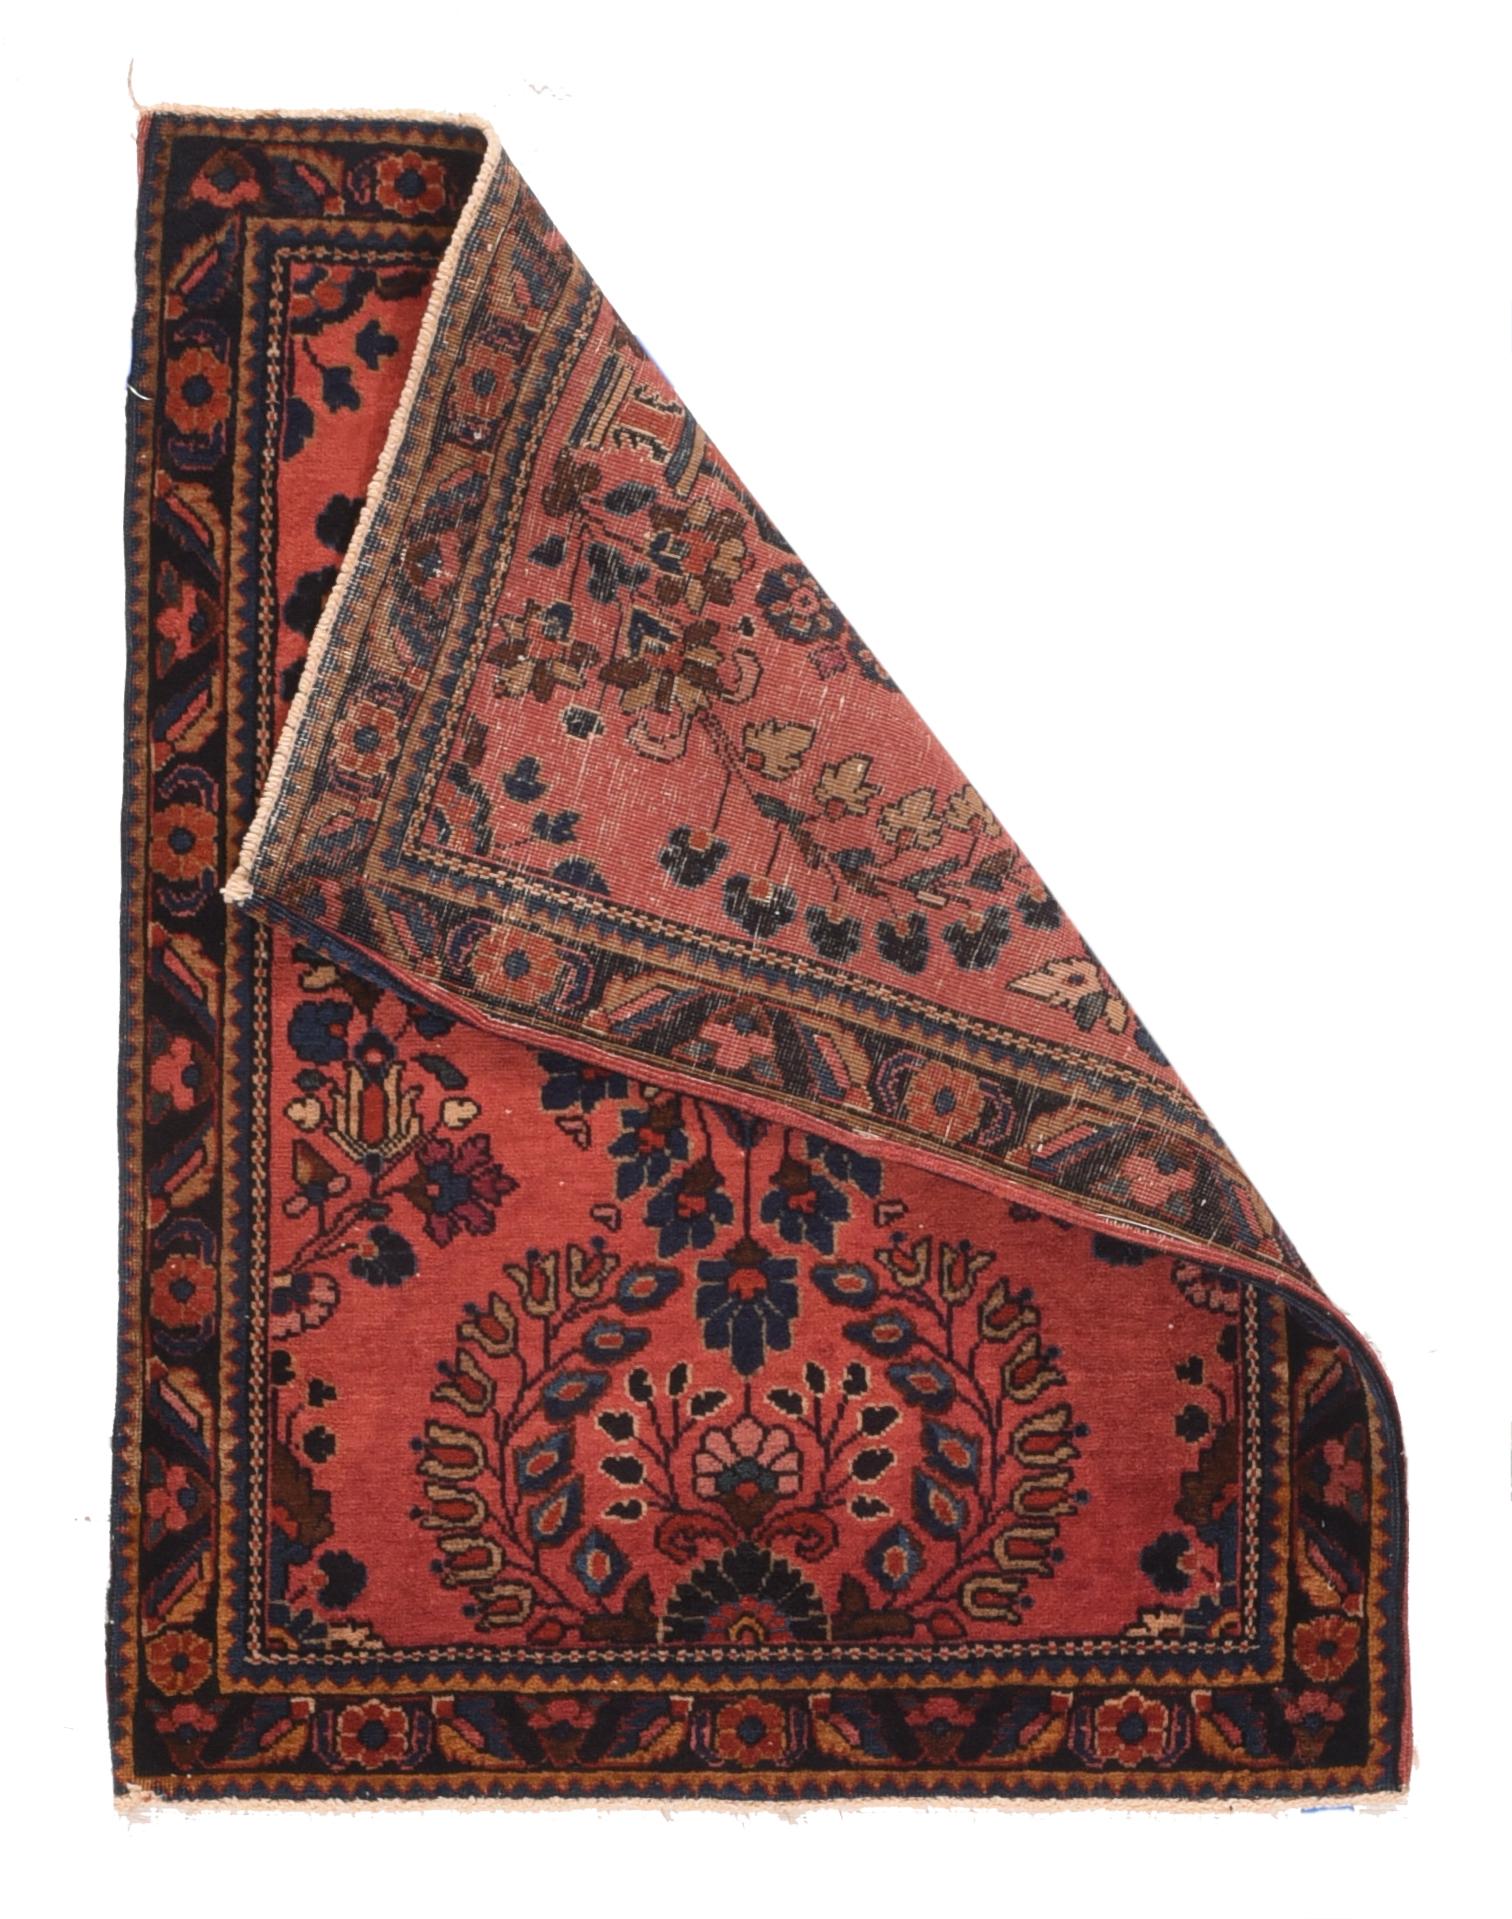 Antique Mohajeran Sarouk Rug 2' x 2'6''. The rust-scarlet field shows a spacious version of the 